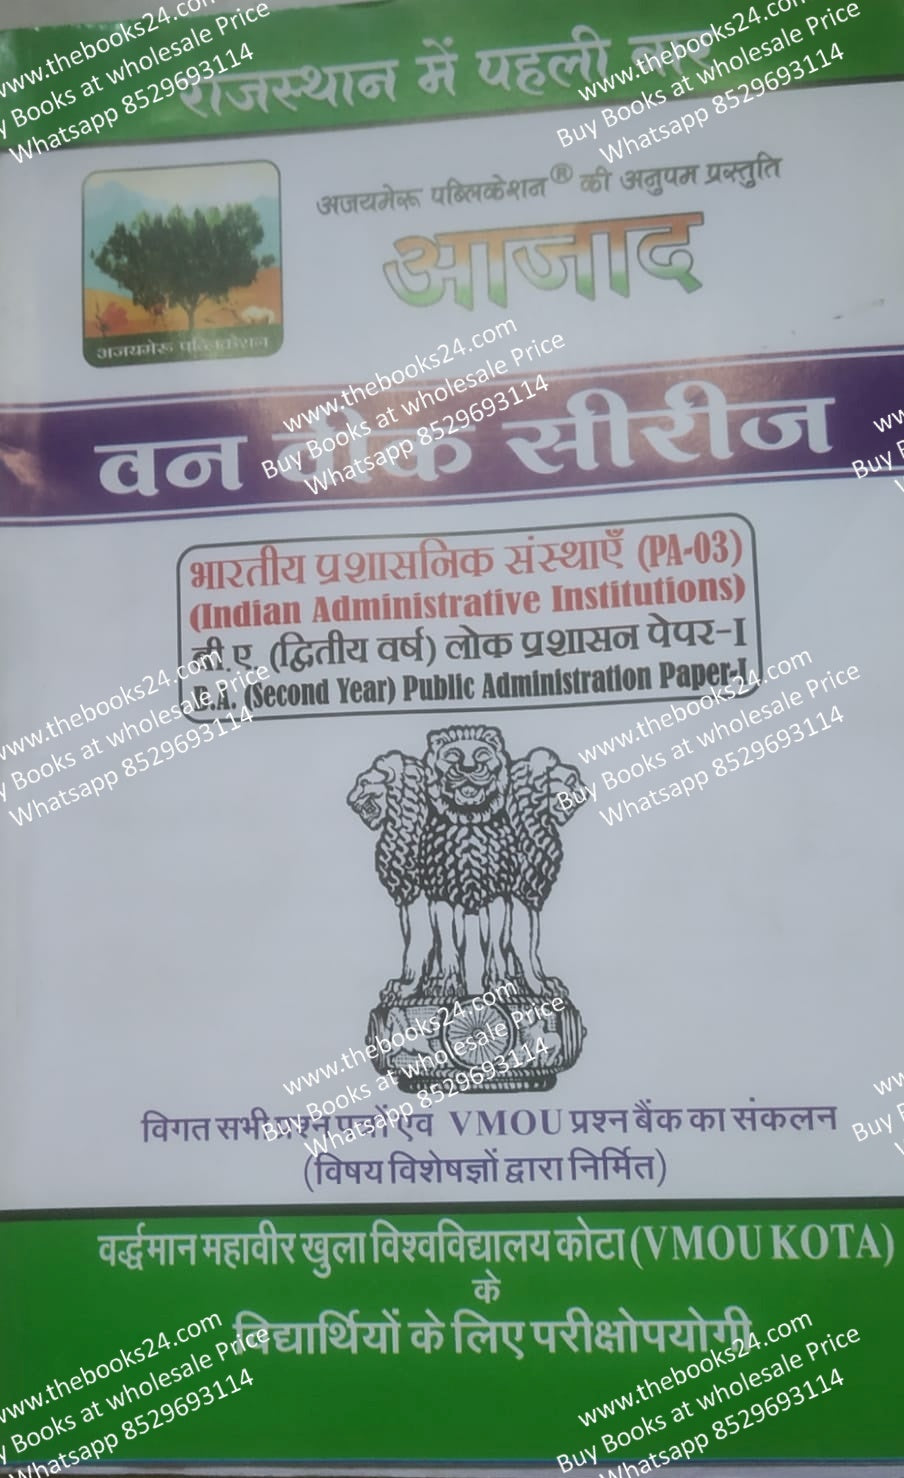 Azad VMOU Kota B.A (Second year) Public Administration Paper-I Indian Administrative Institutions (PA-03)